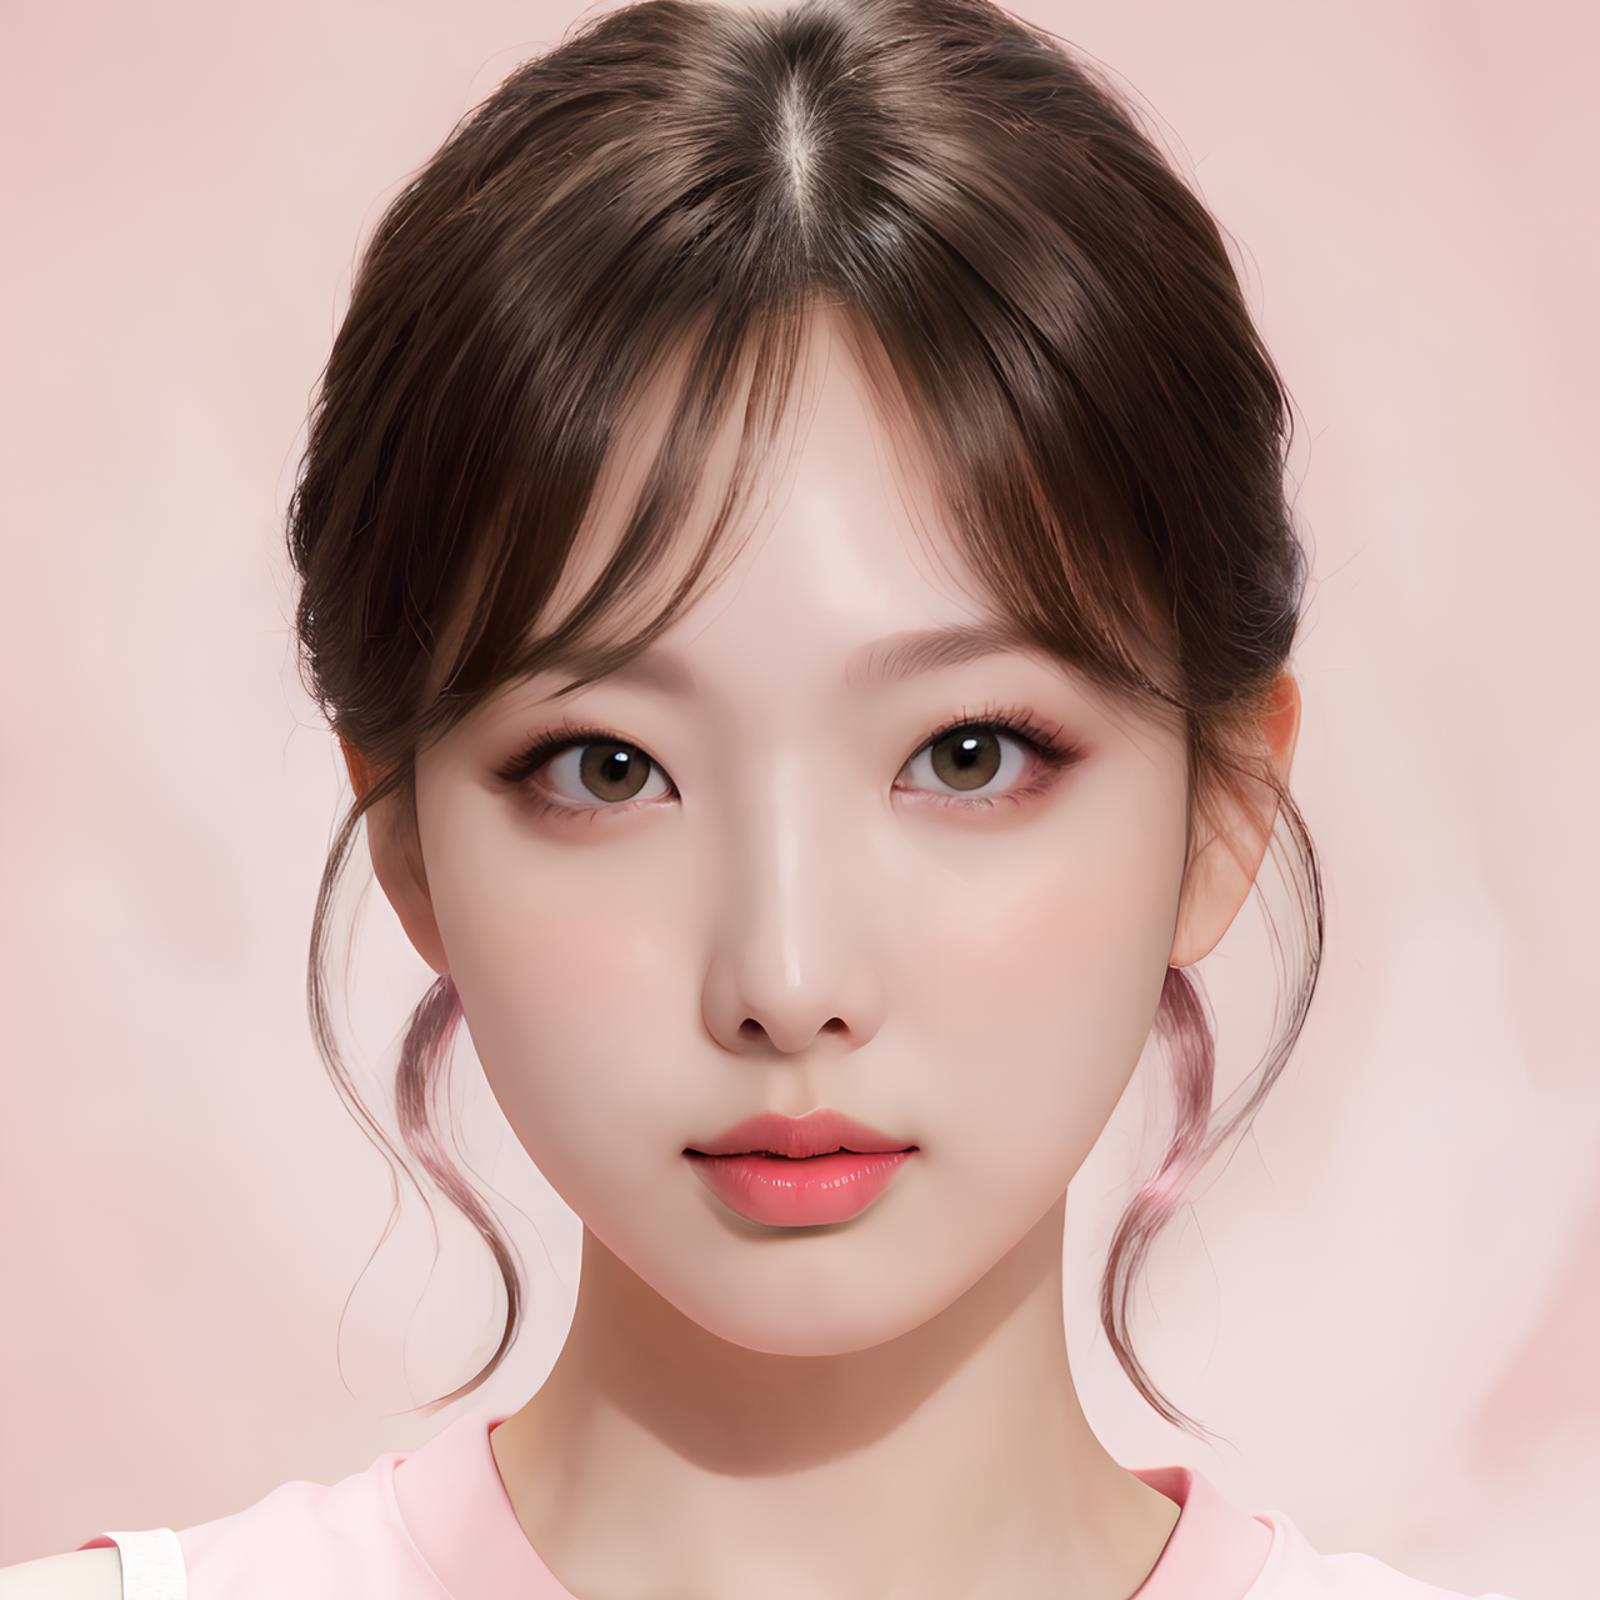 Not Twice - Nayeon image by Tissue_AI